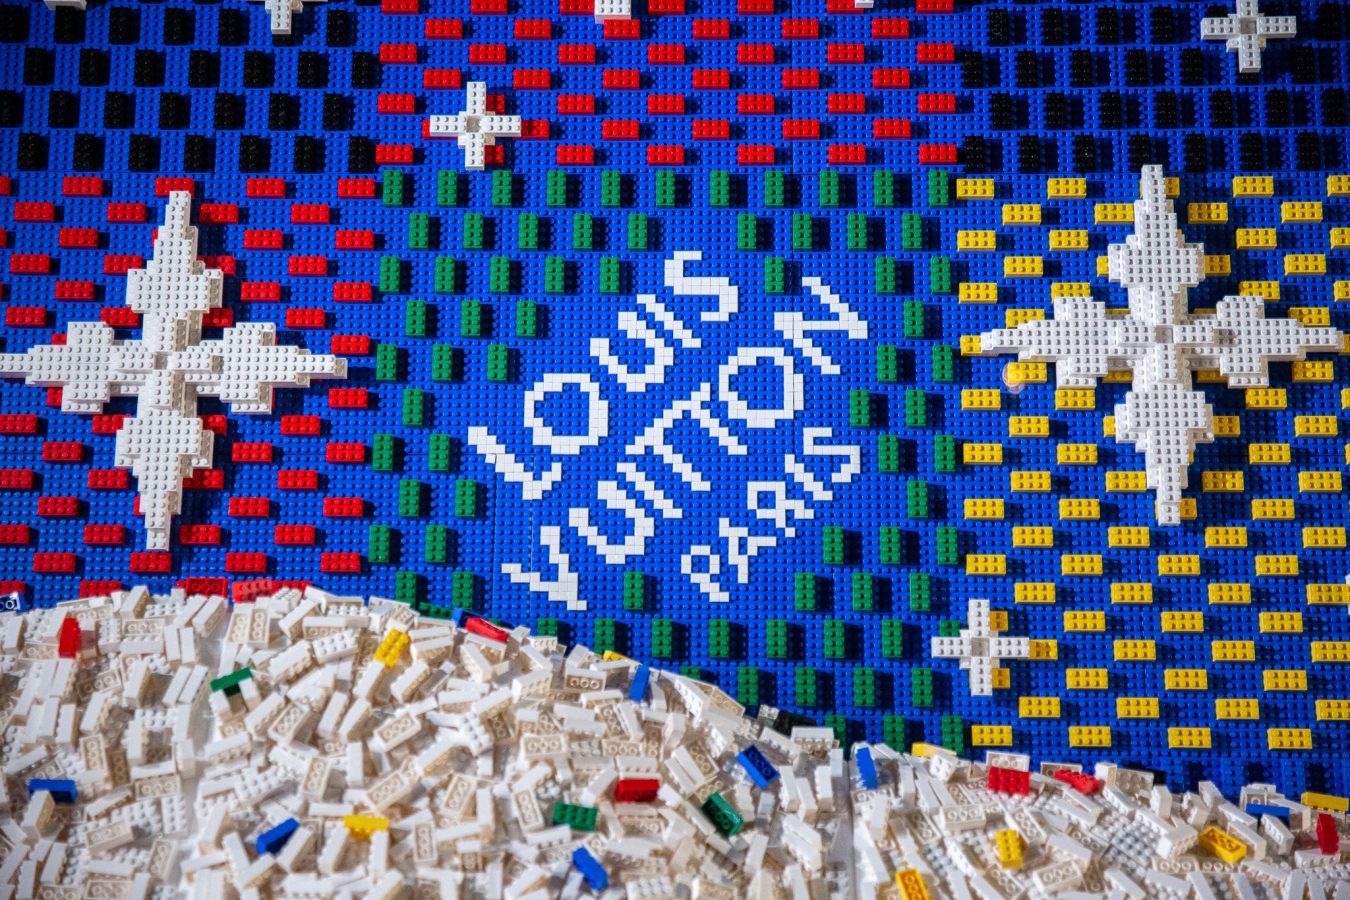 Louis Vuitton and LEGO collaborate for holiday displays this festive season